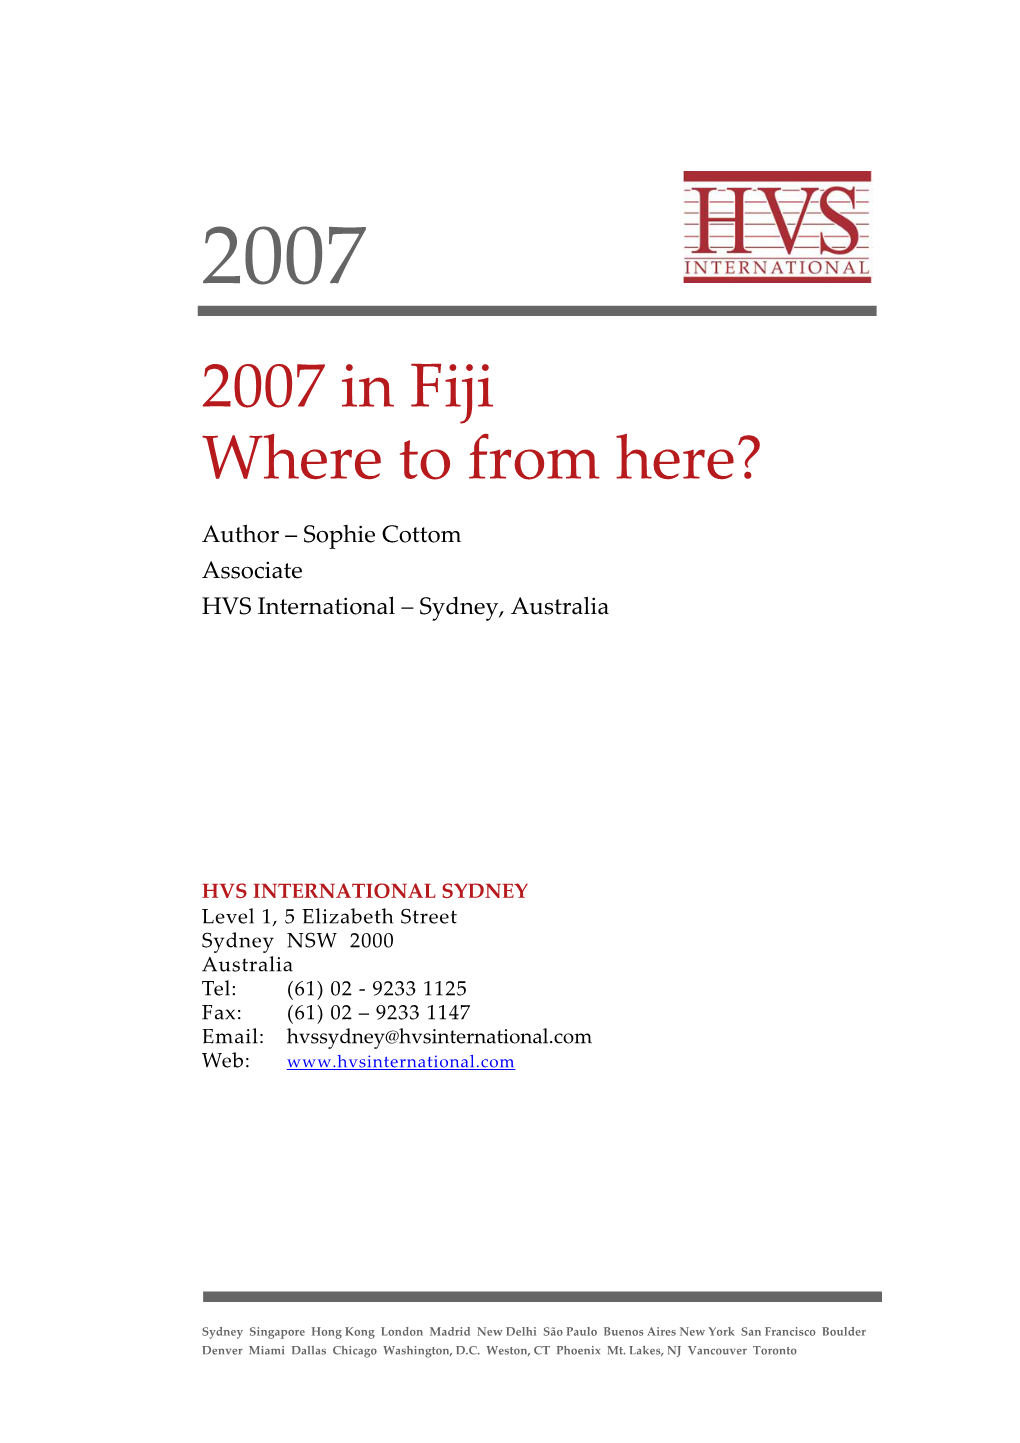 2007 in Fiji Where to from Here?